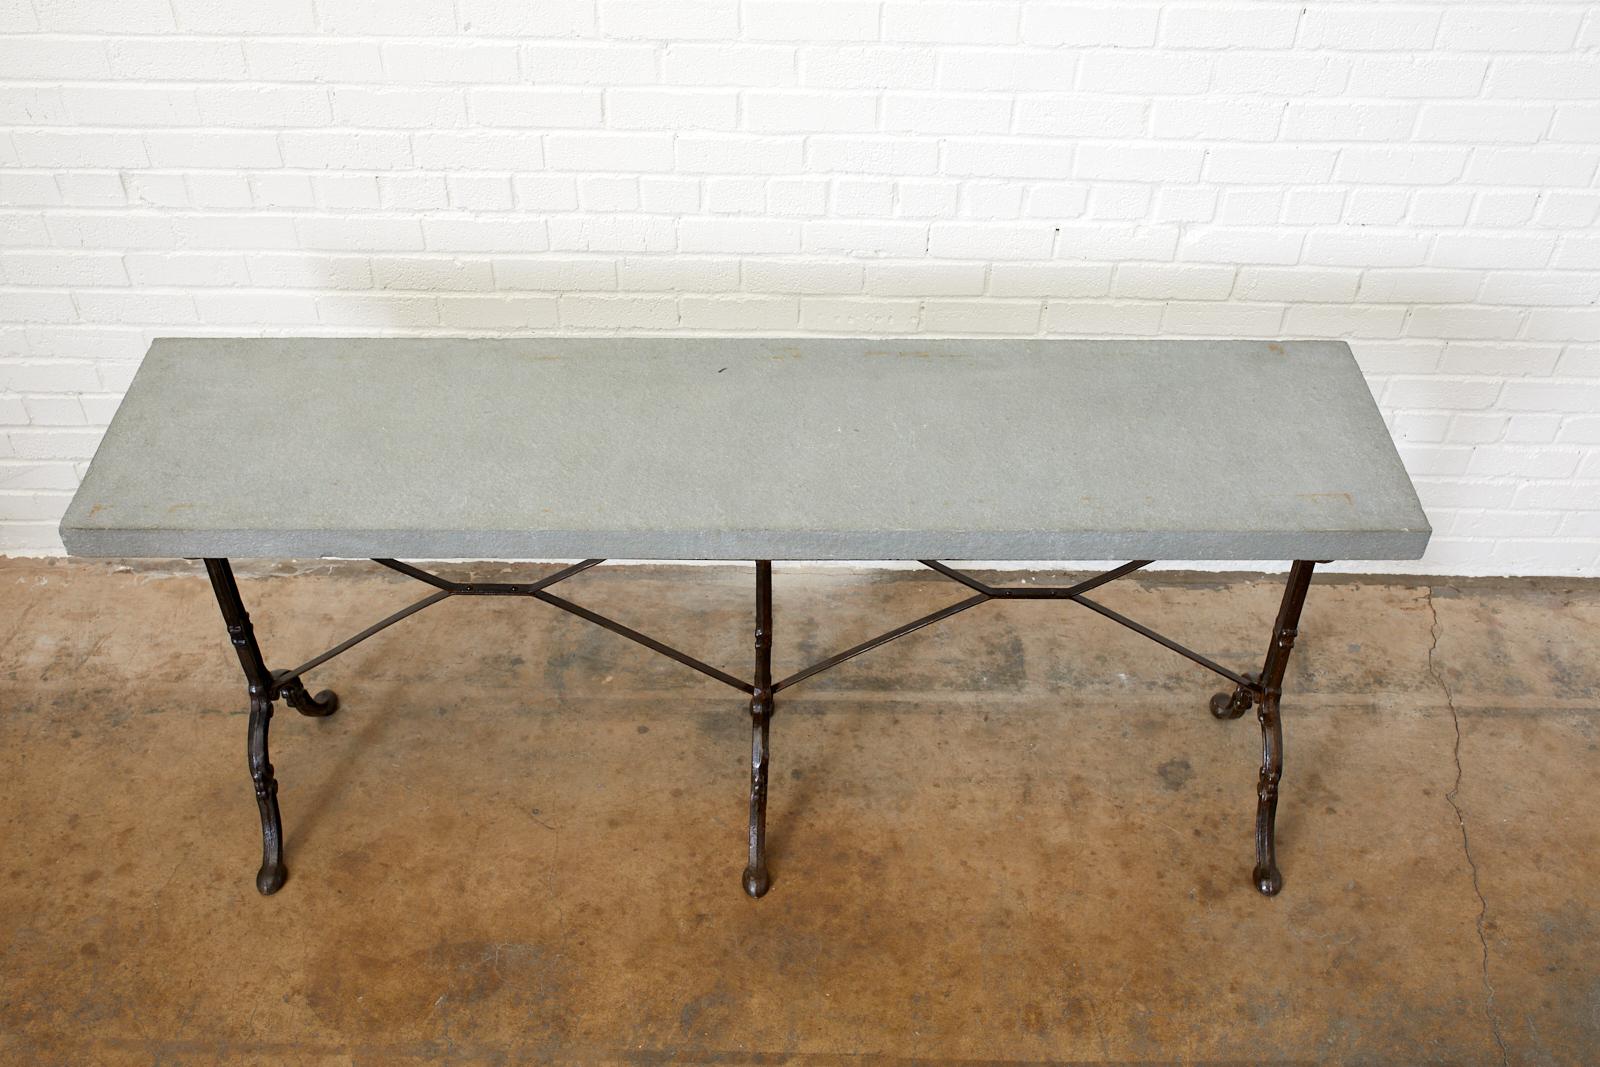 Hand-Crafted French Slate Top Triple Iron Leg Pastry Table